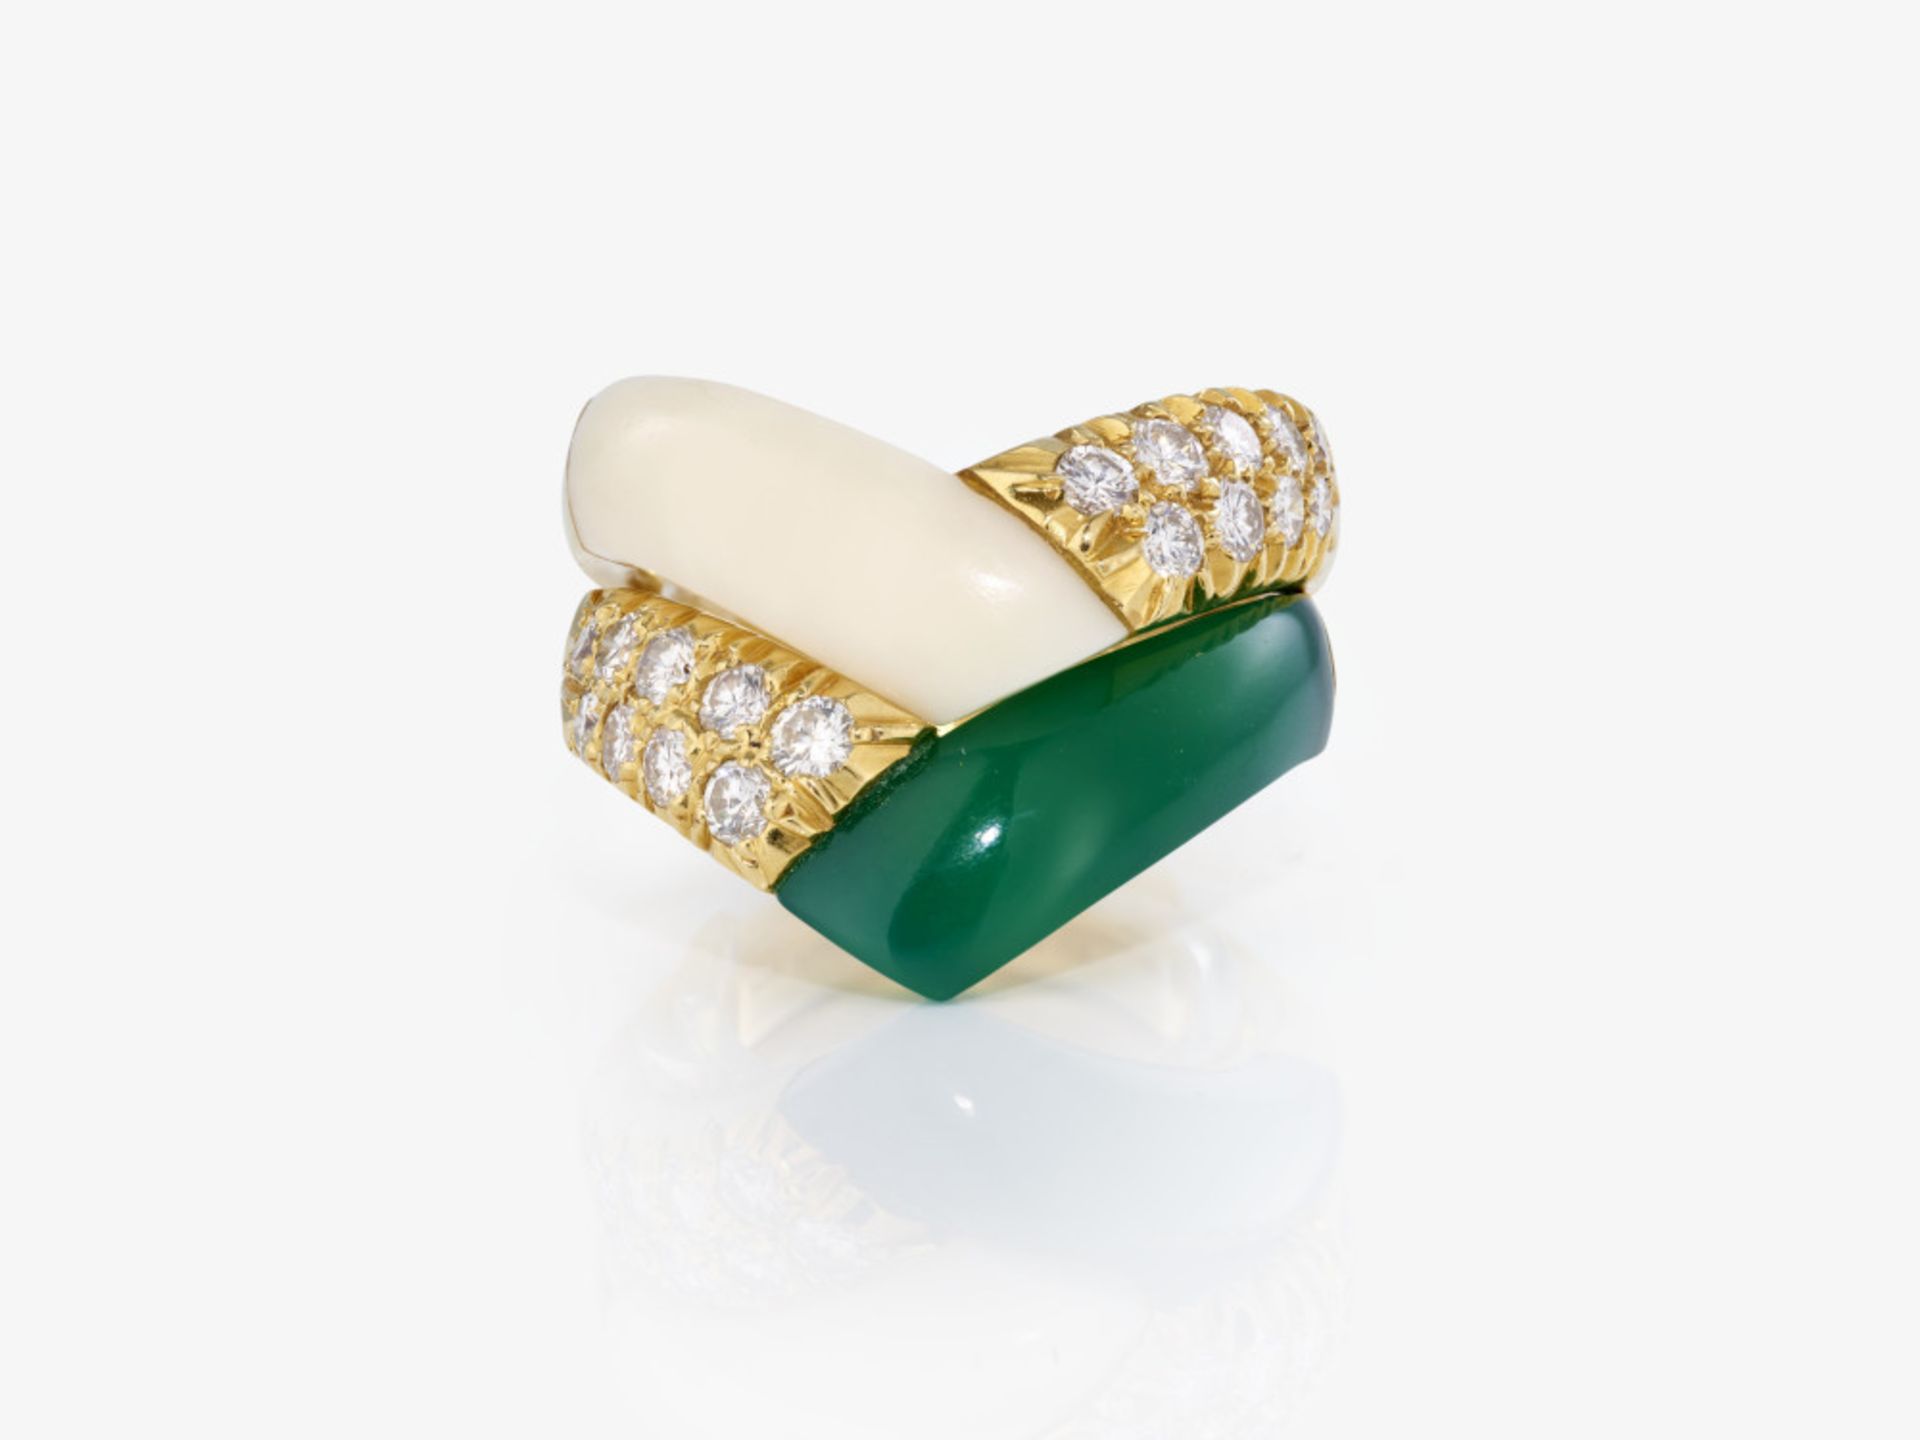 Two rings with brilliant-cut diamonds, white coral and green agate - Paris, dated 1976 and 1977 (gre - Image 2 of 2